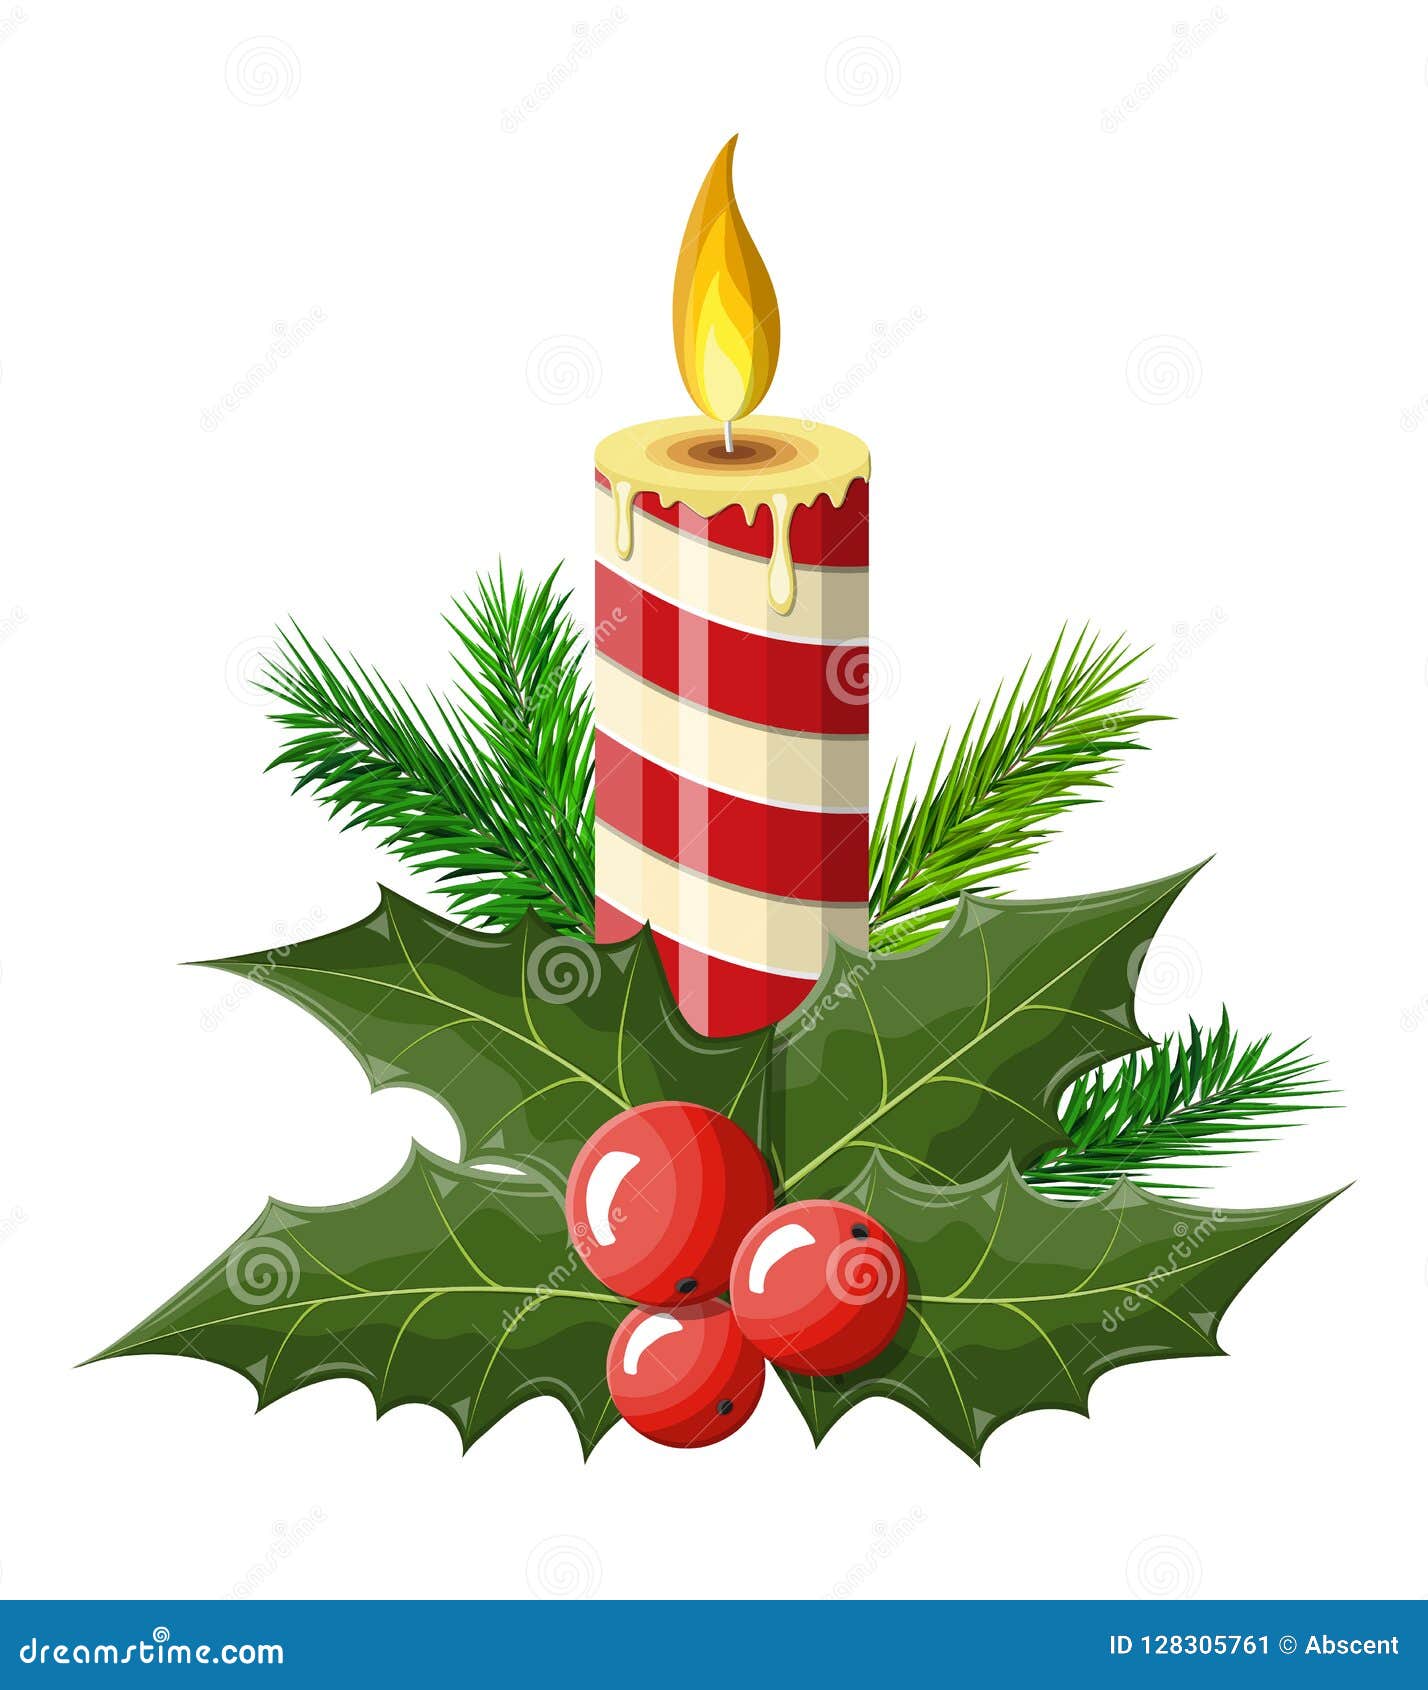 Burning Candle, Holly Leaves And Red Berries. Stock Vector